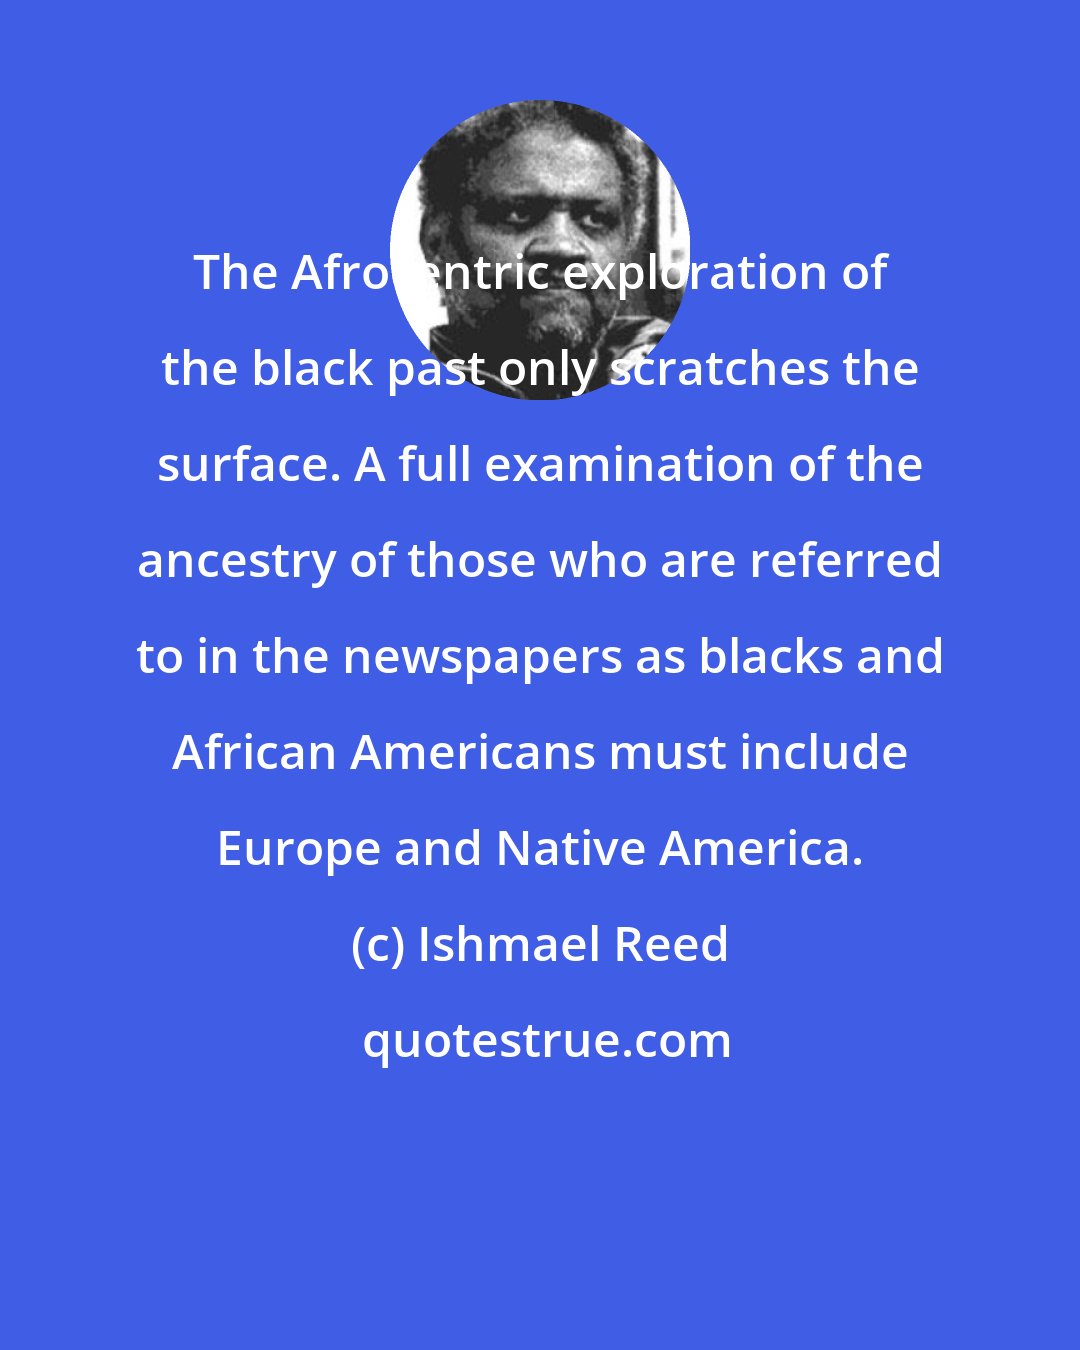 Ishmael Reed: The Afrocentric exploration of the black past only scratches the surface. A full examination of the ancestry of those who are referred to in the newspapers as blacks and African Americans must include Europe and Native America.